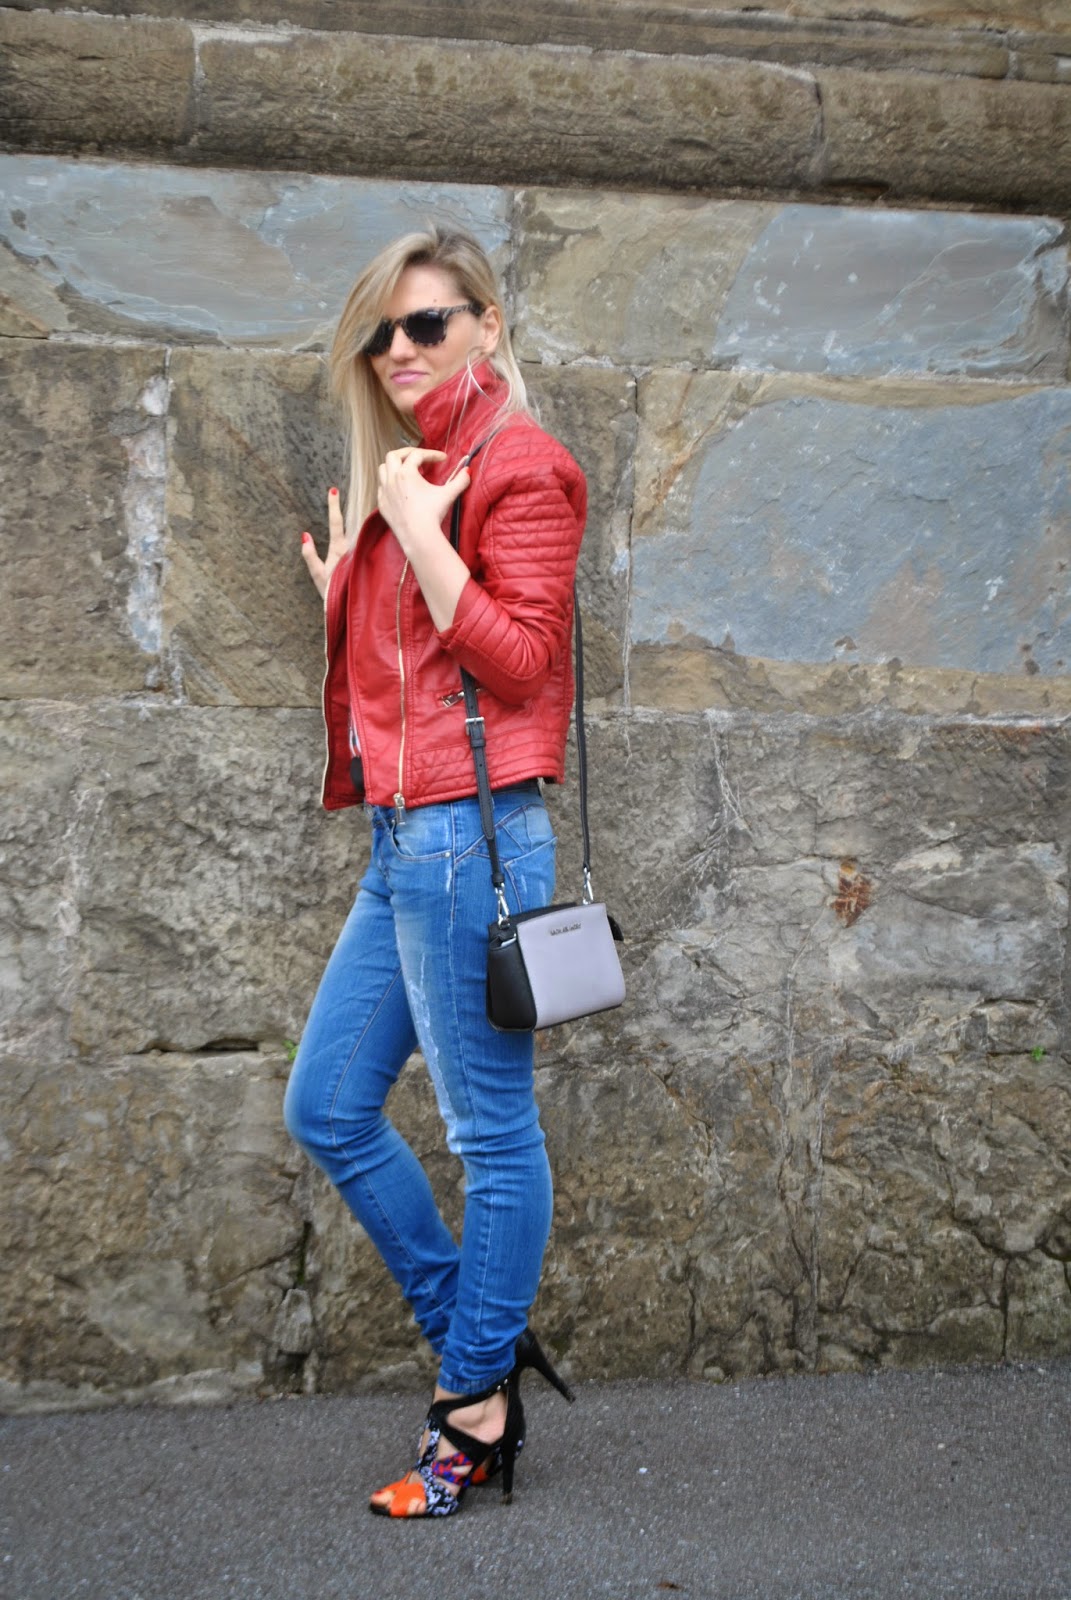 Color-Block By FelyM.: OUTFT: JEANS SKINNY, HEELS AND RED ...
